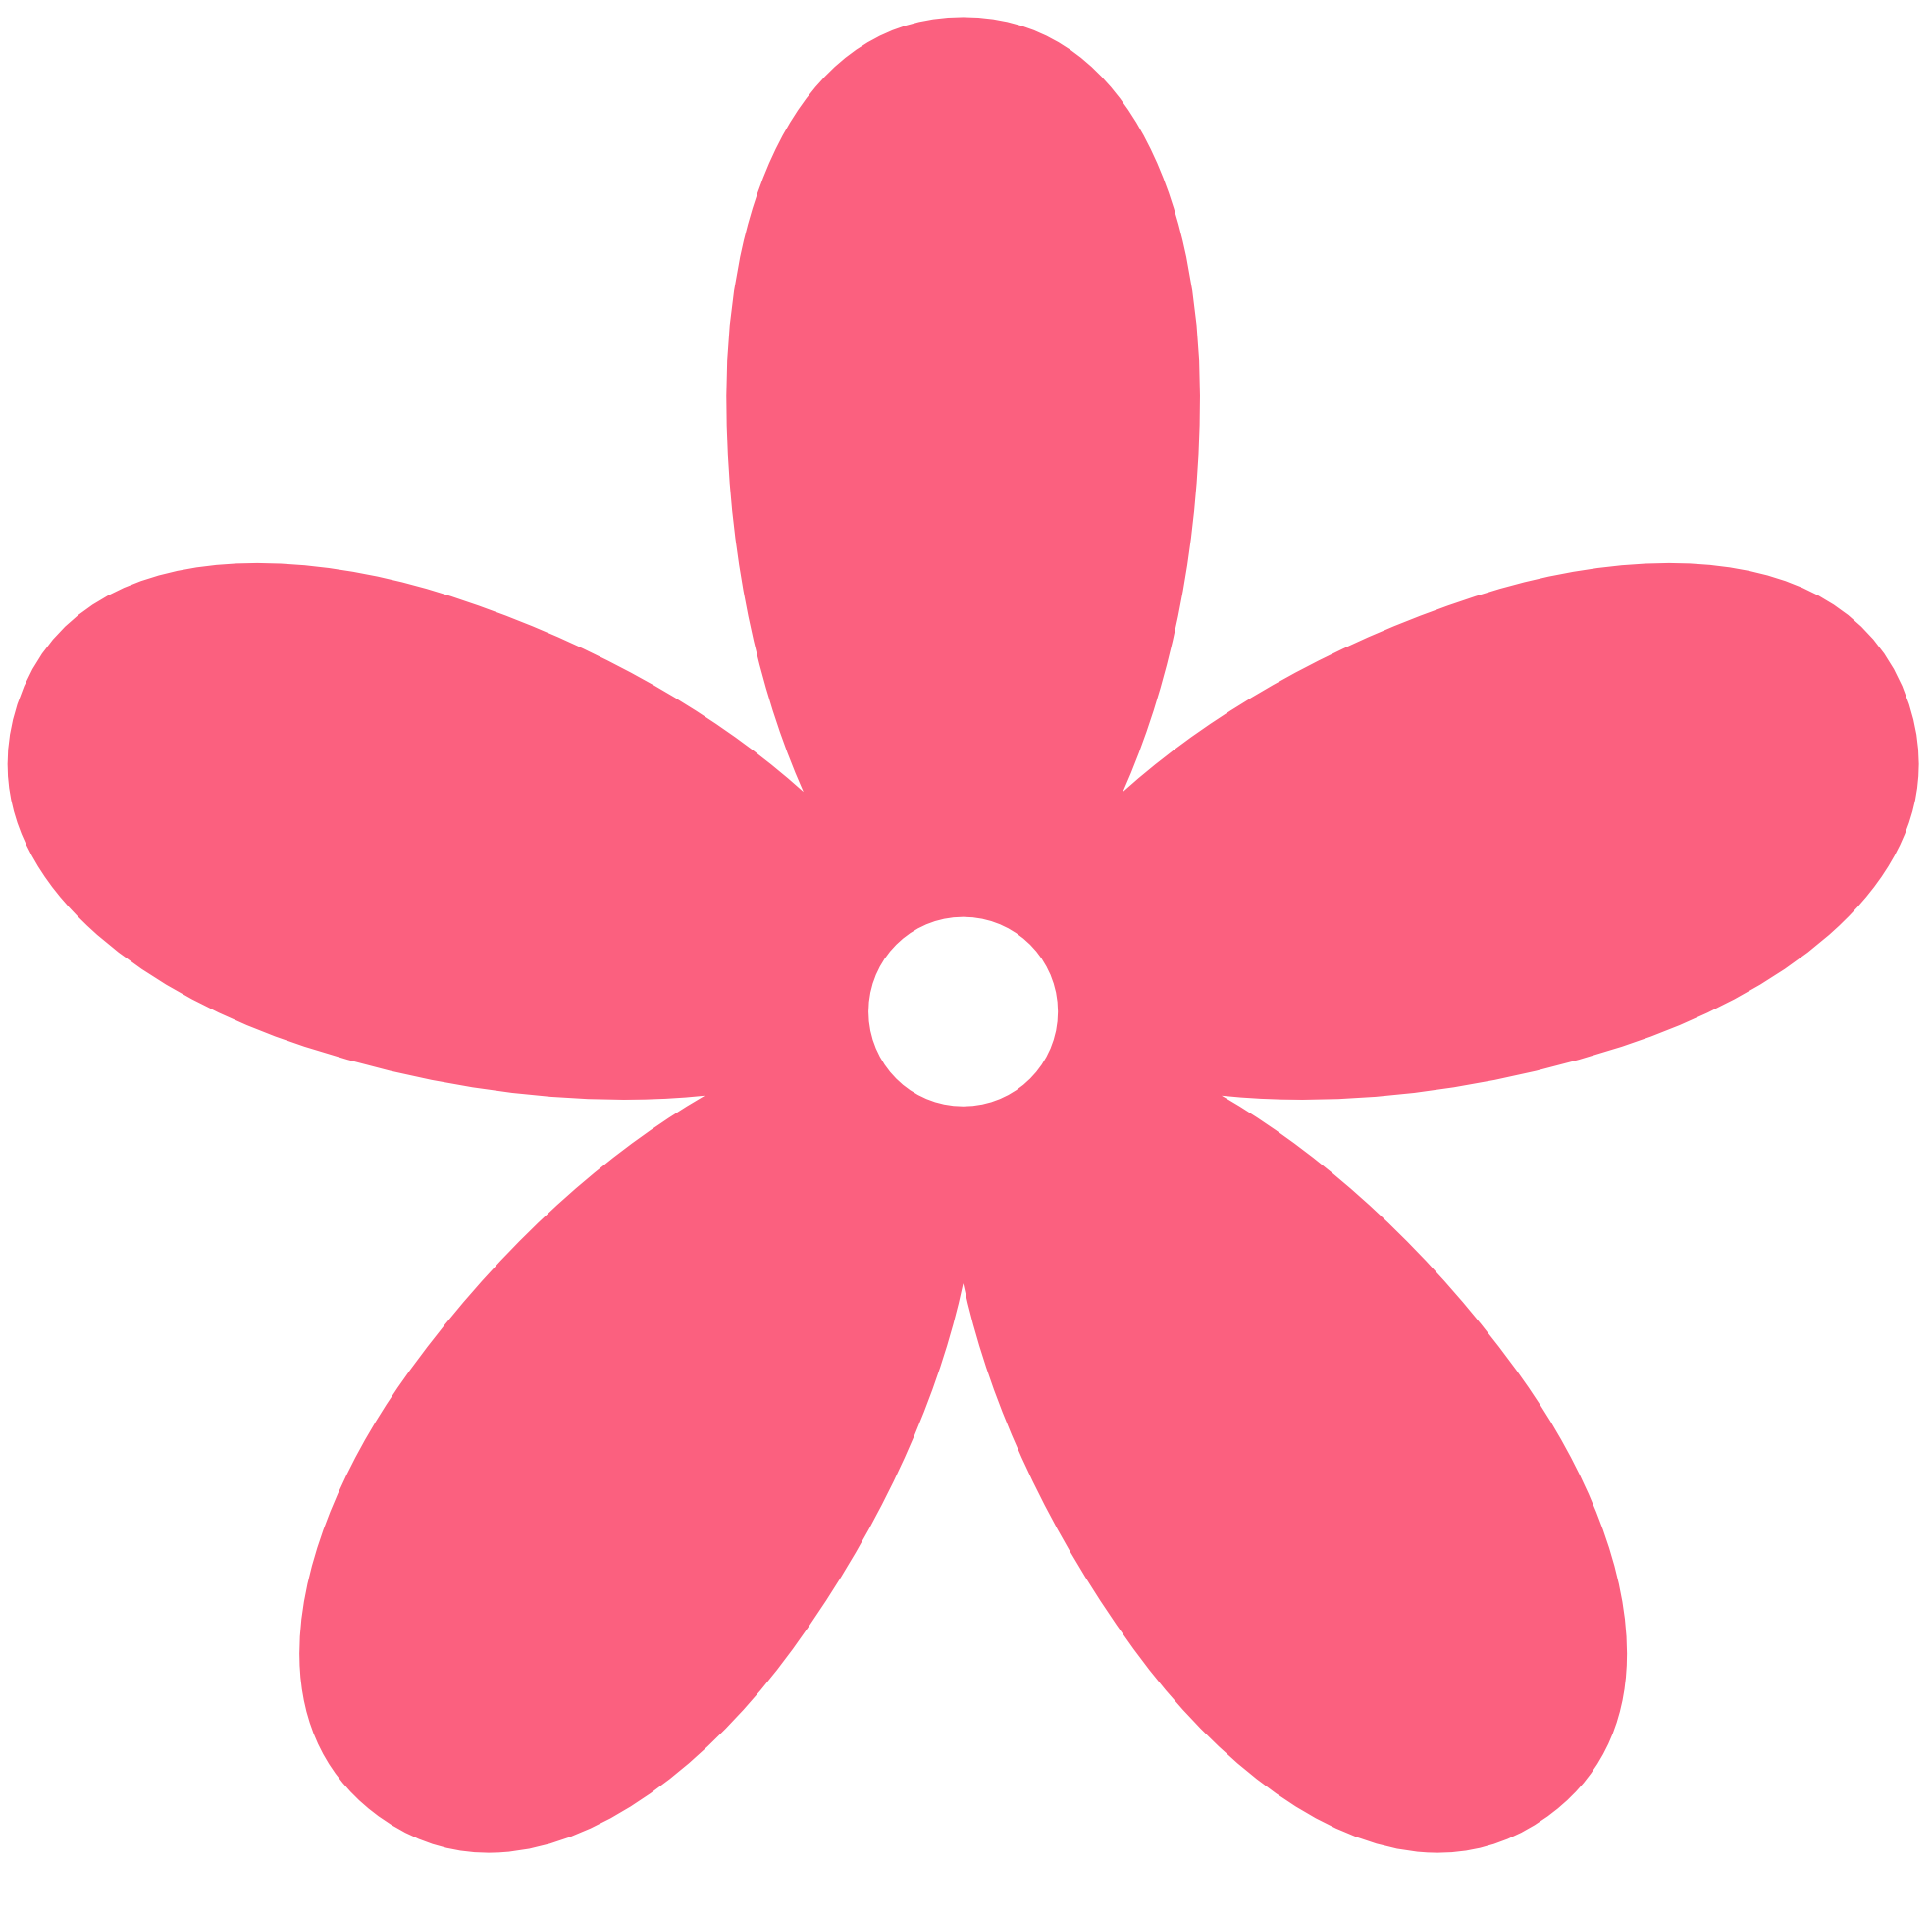 Flower Clip Art For Cards | Clipart library - Free Clipart Images